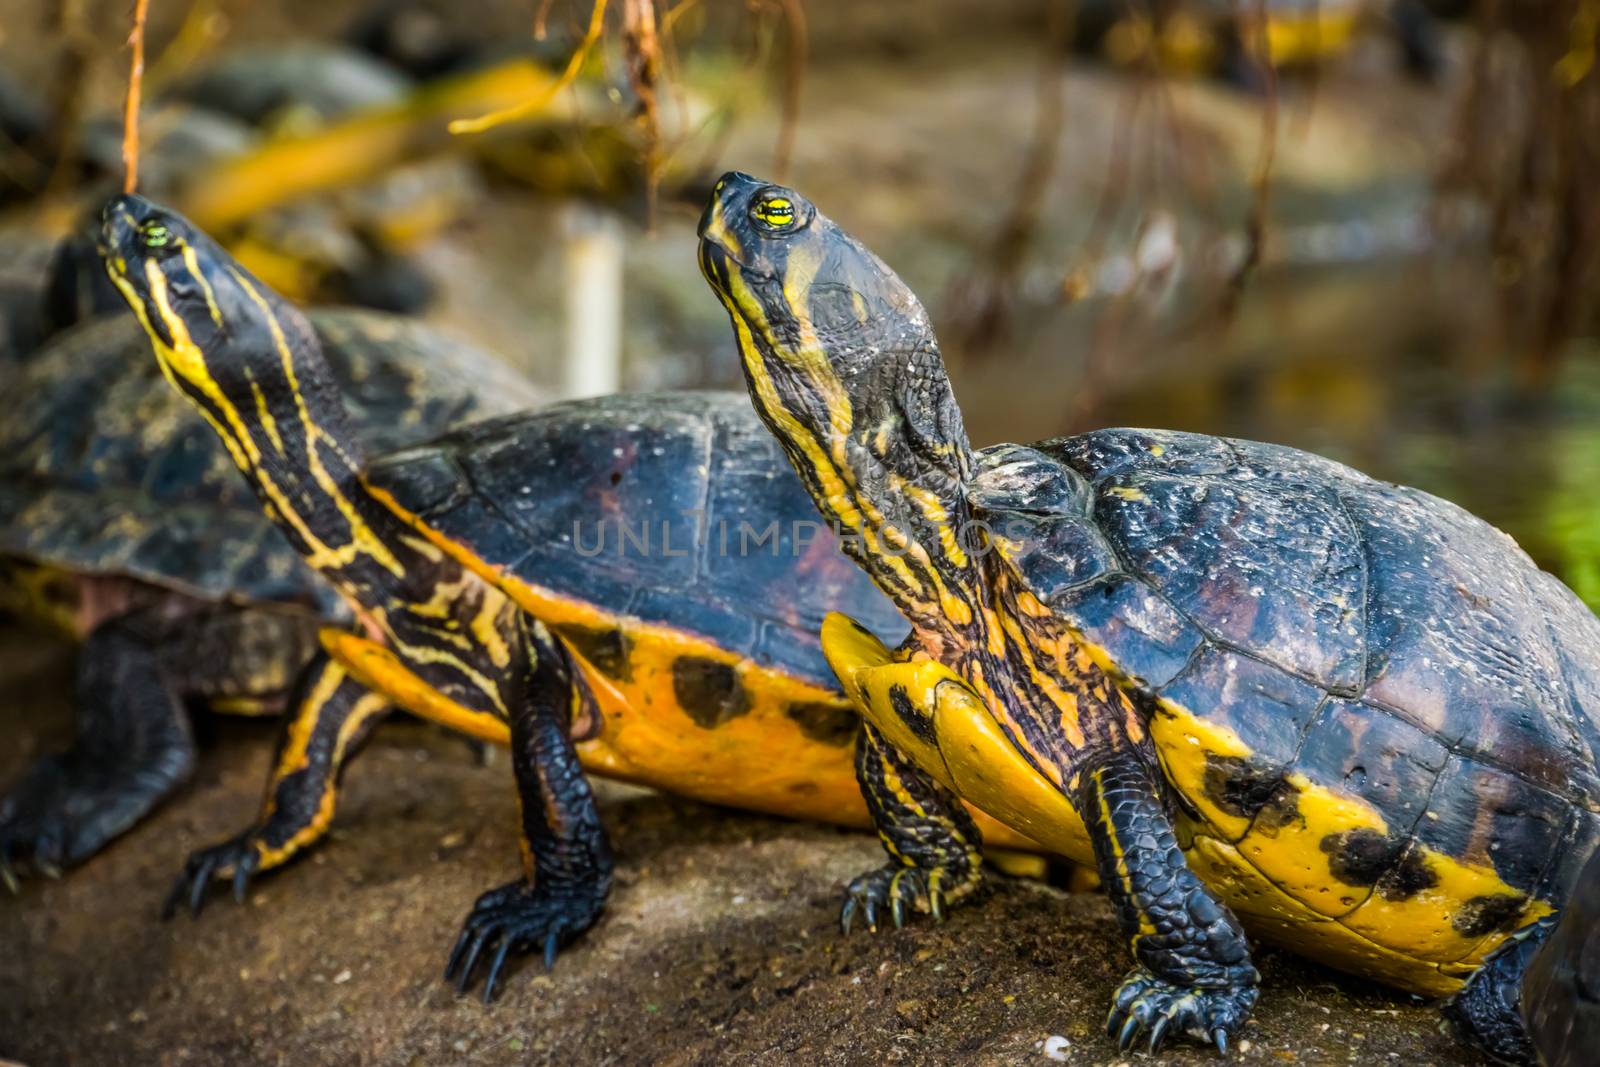 closeup of a cumberland slider turtle with other swamp turtles in the background, tropical reptile specie from America by charlottebleijenberg